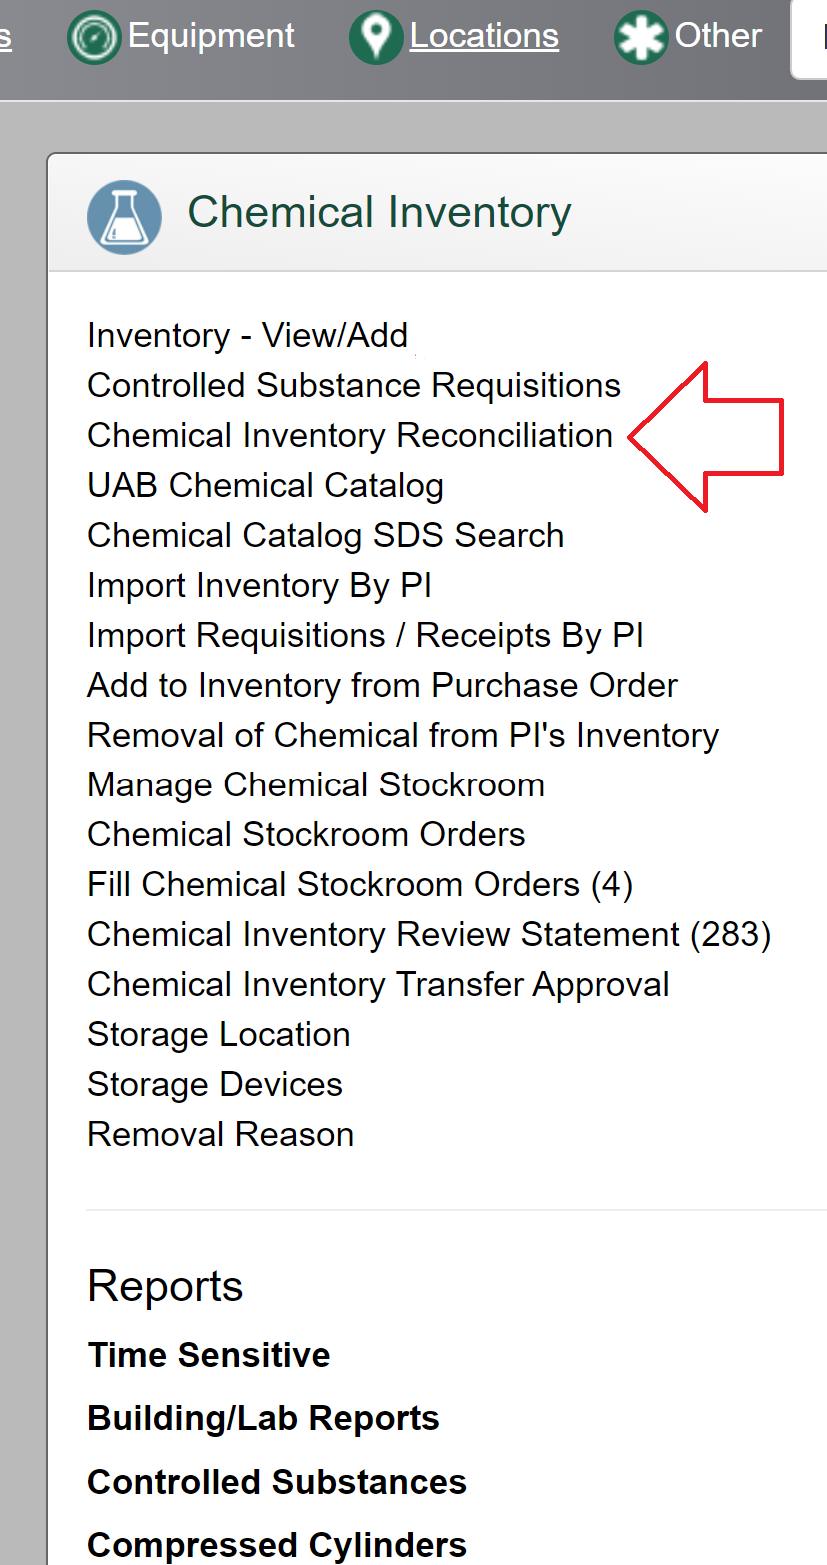 At the Chemical Inventory box, click on “Chem Inventory Reconciliation”